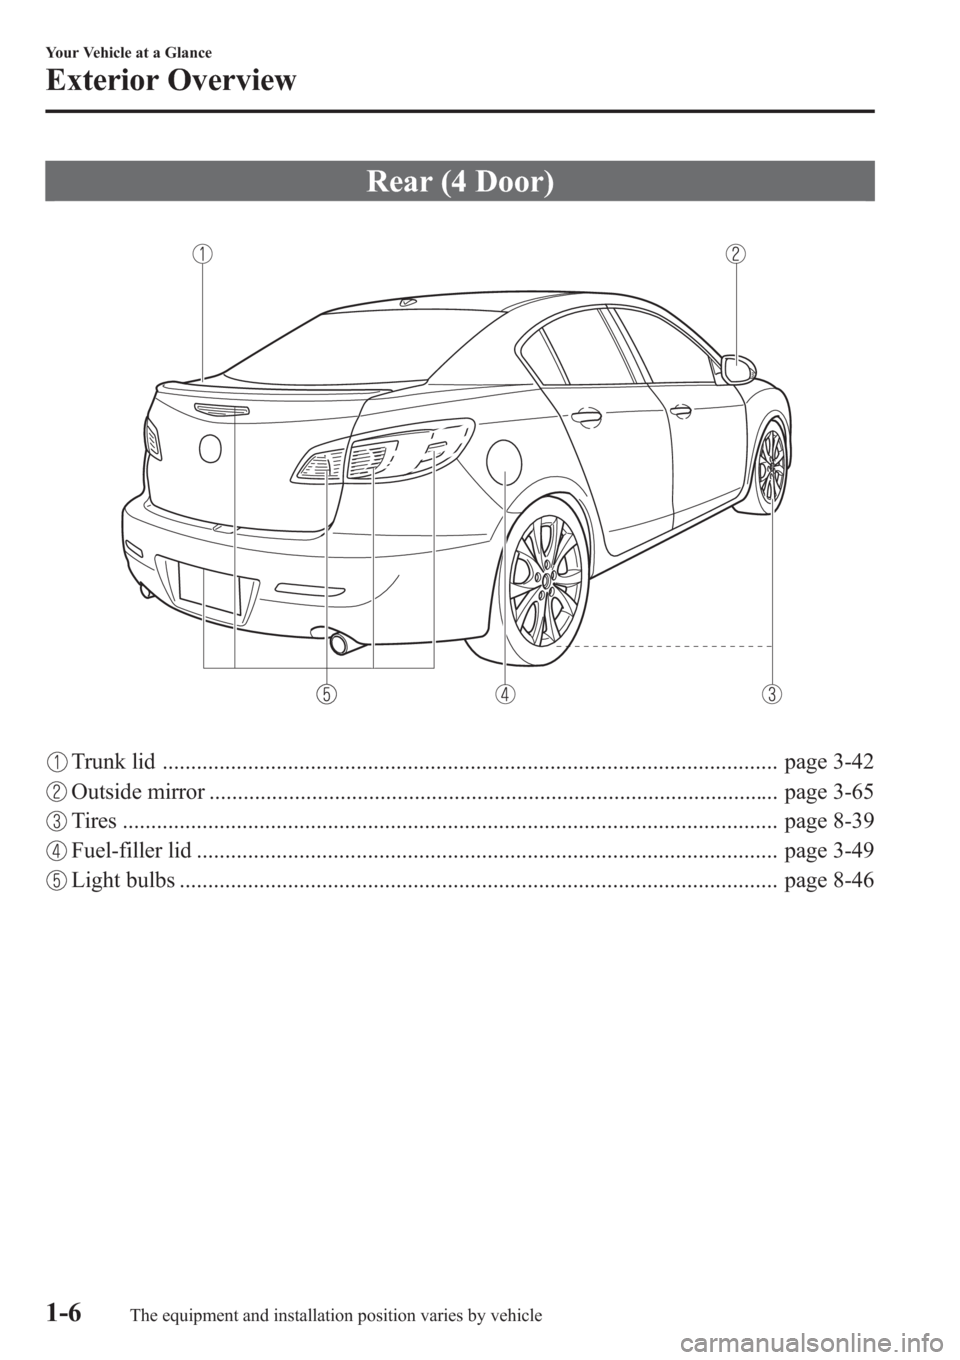 MAZDA MODEL 3 HATCHBACK 2013  Owners Manual (in English) Rear (4 Door)
Trunk lid ............................................................................................................ page 3-42
Outside mirror ..........................................